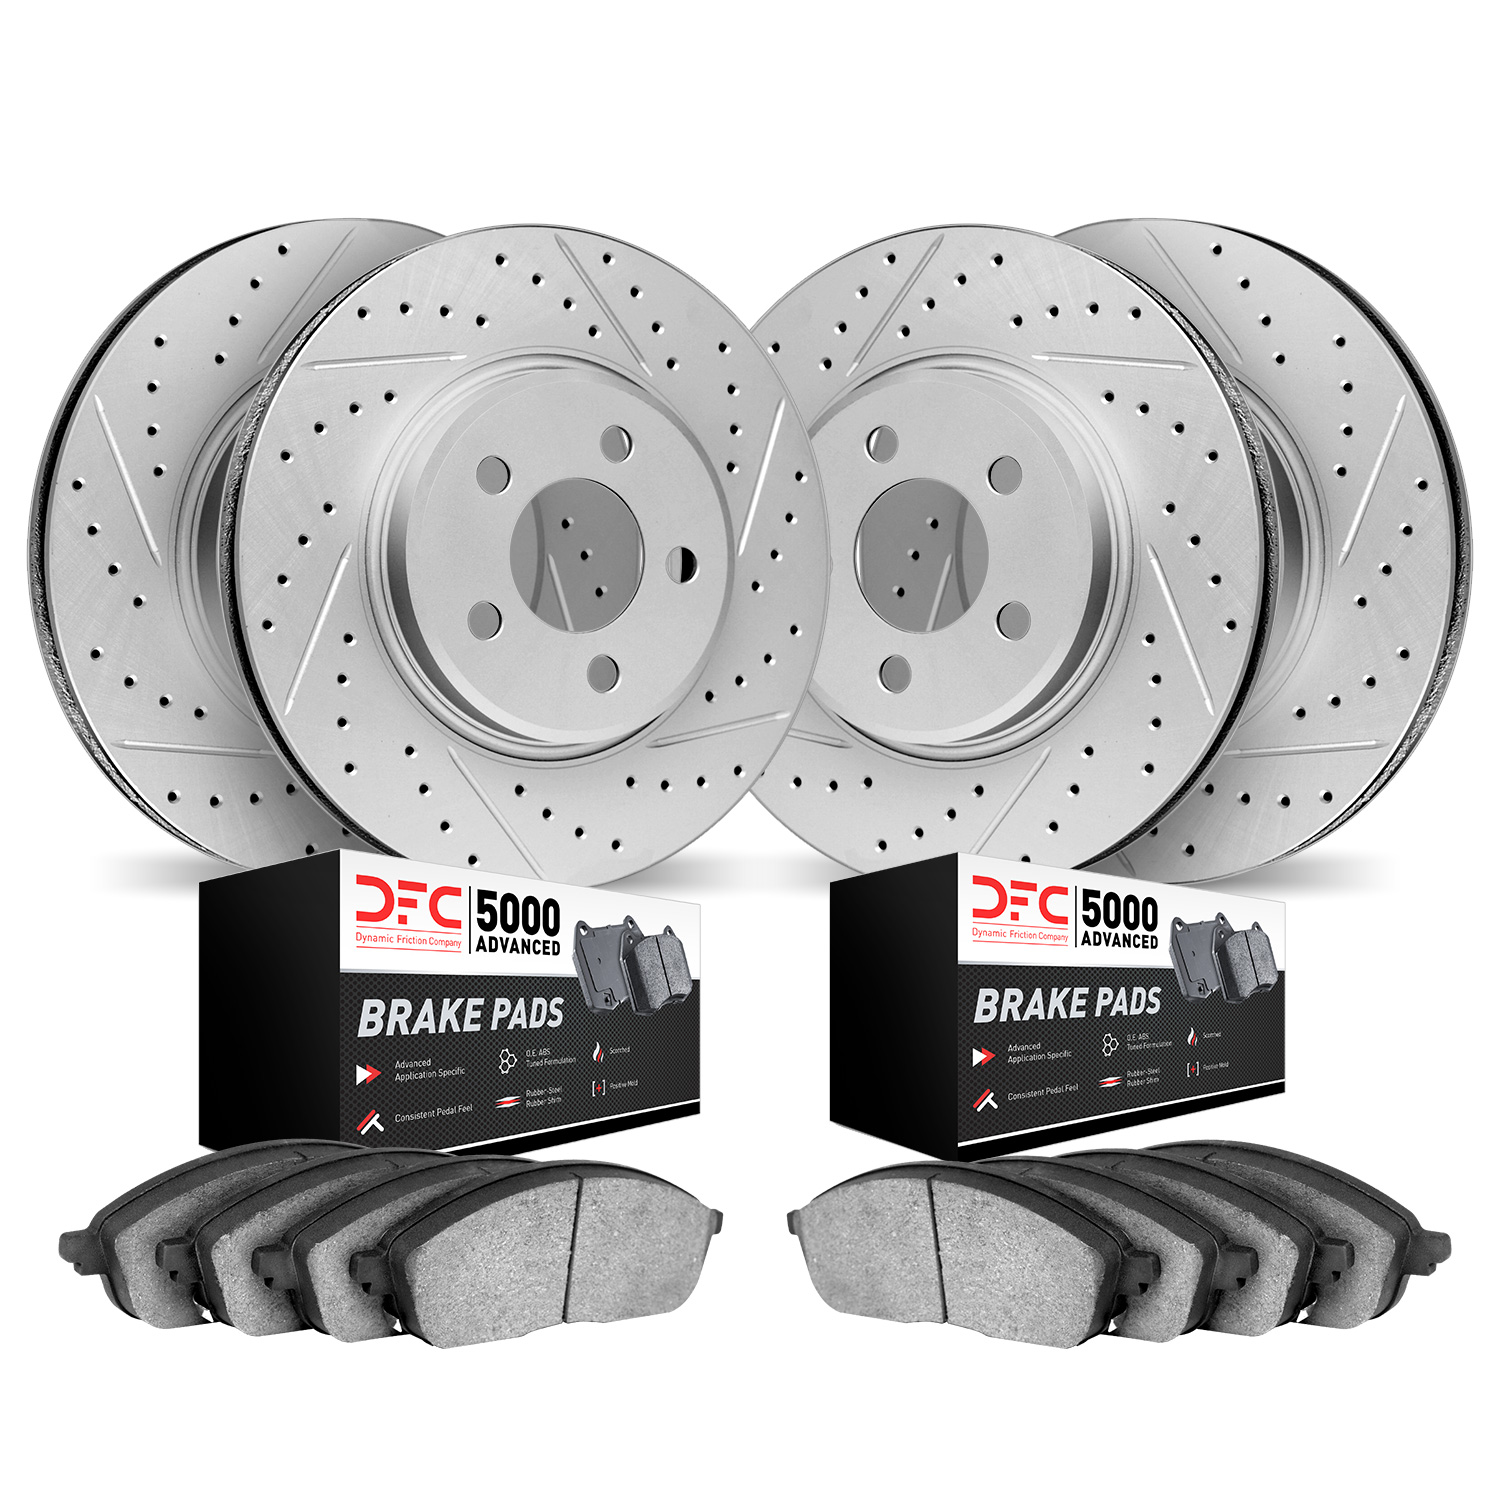 2504-20006 Geoperformance Drilled/Slotted Rotors w/5000 Advanced Brake Pads Kit, 2016-2019 Jaguar, Position: Front and Rear